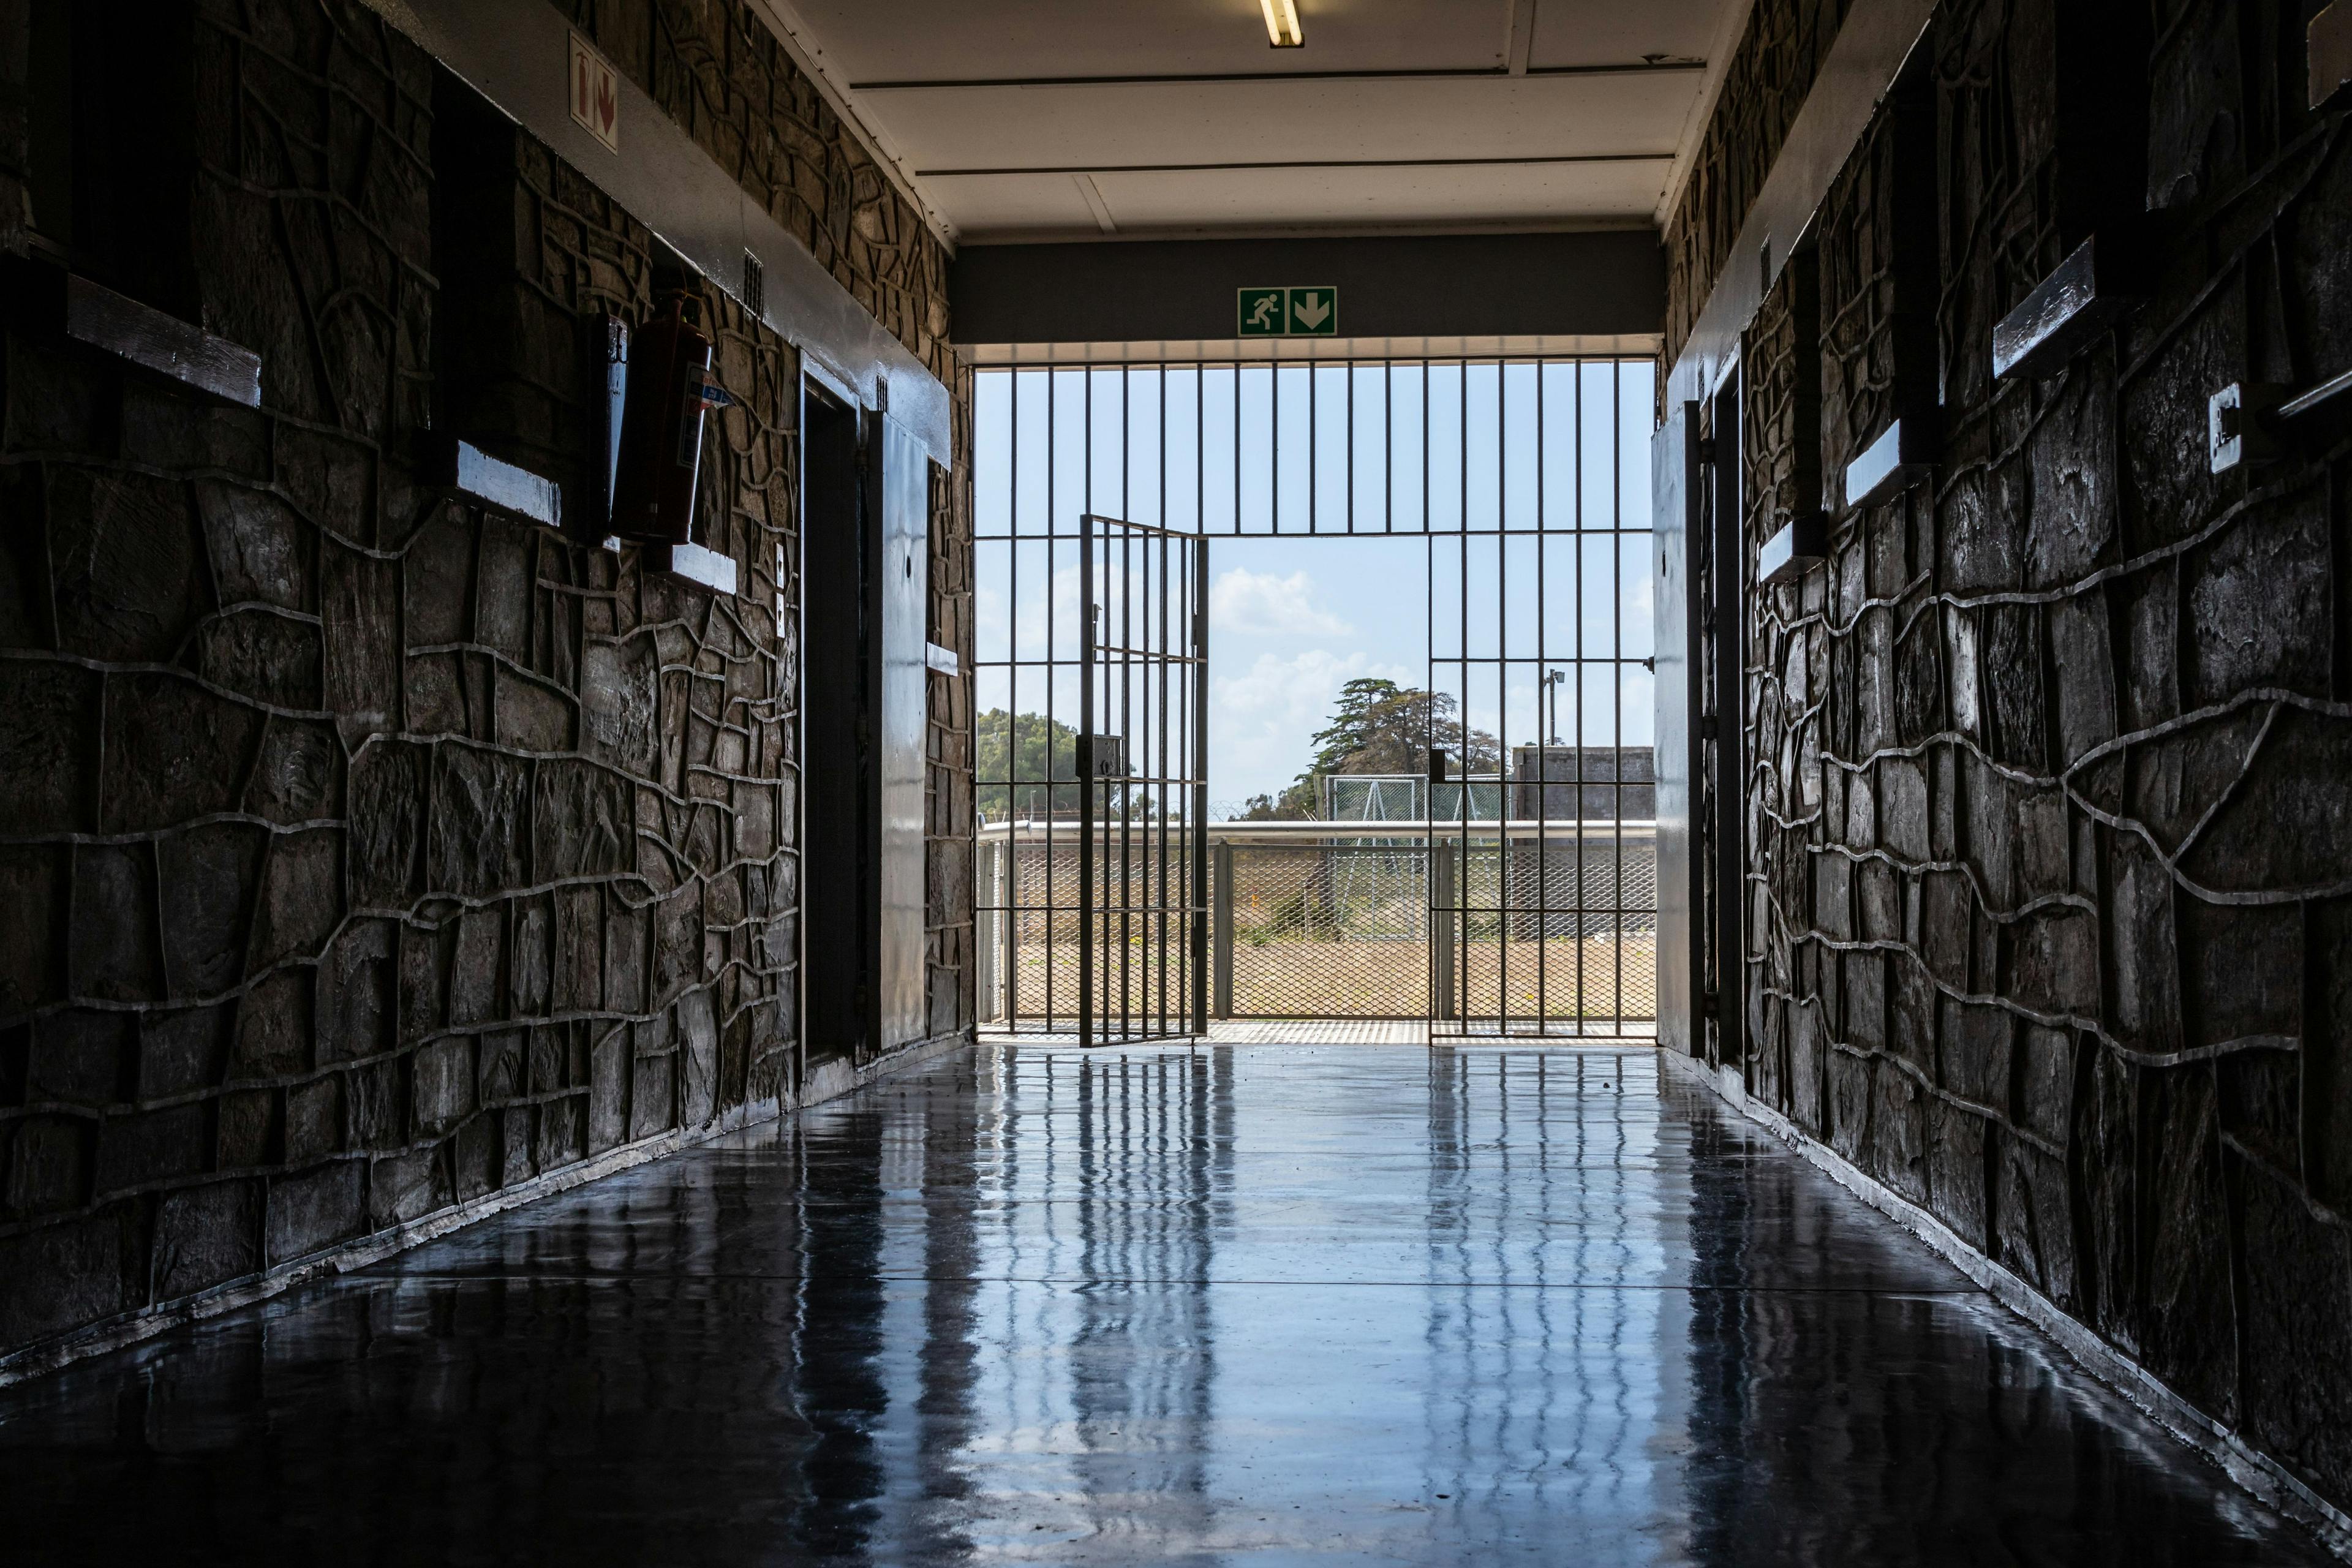 Robben island prison in South Africa.